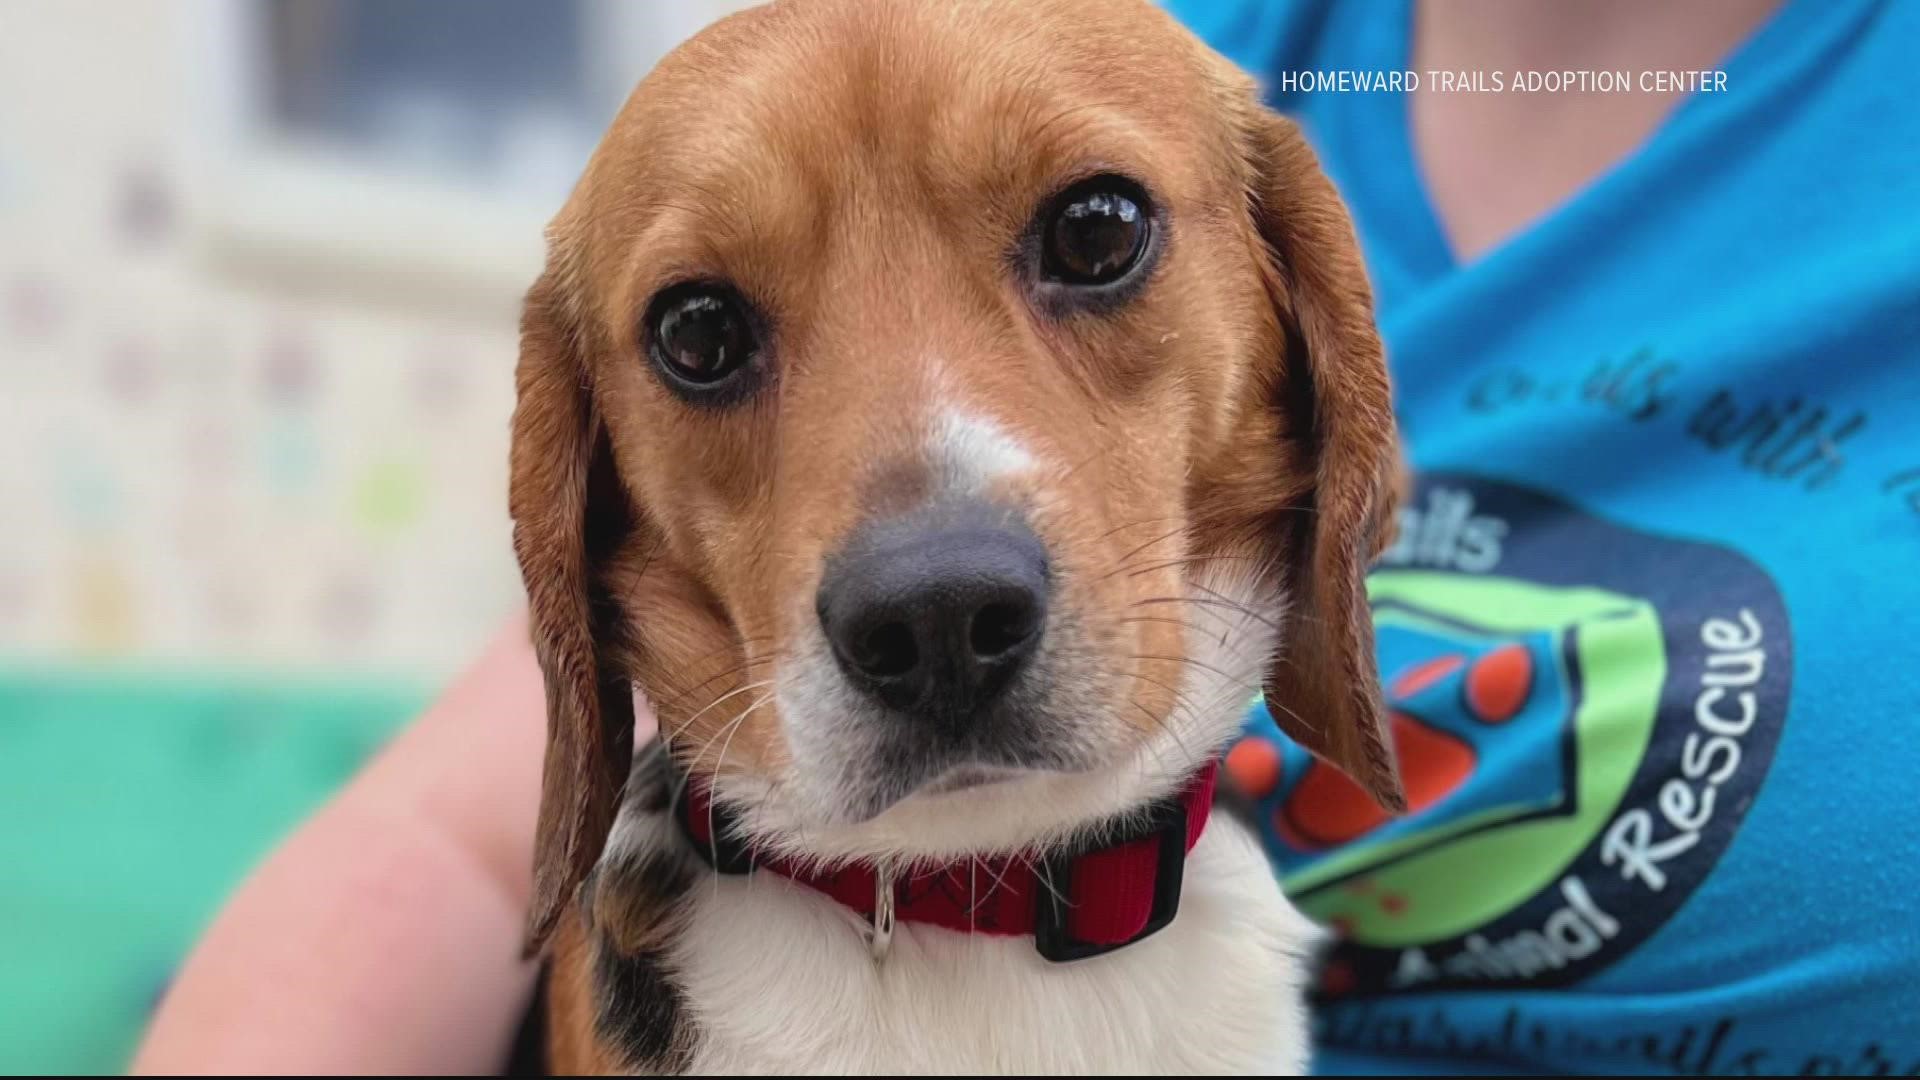 The Homeward Trails organization has a few weeks to find homes for the beagles after they were found at a facility with dozens of animal rights violations.